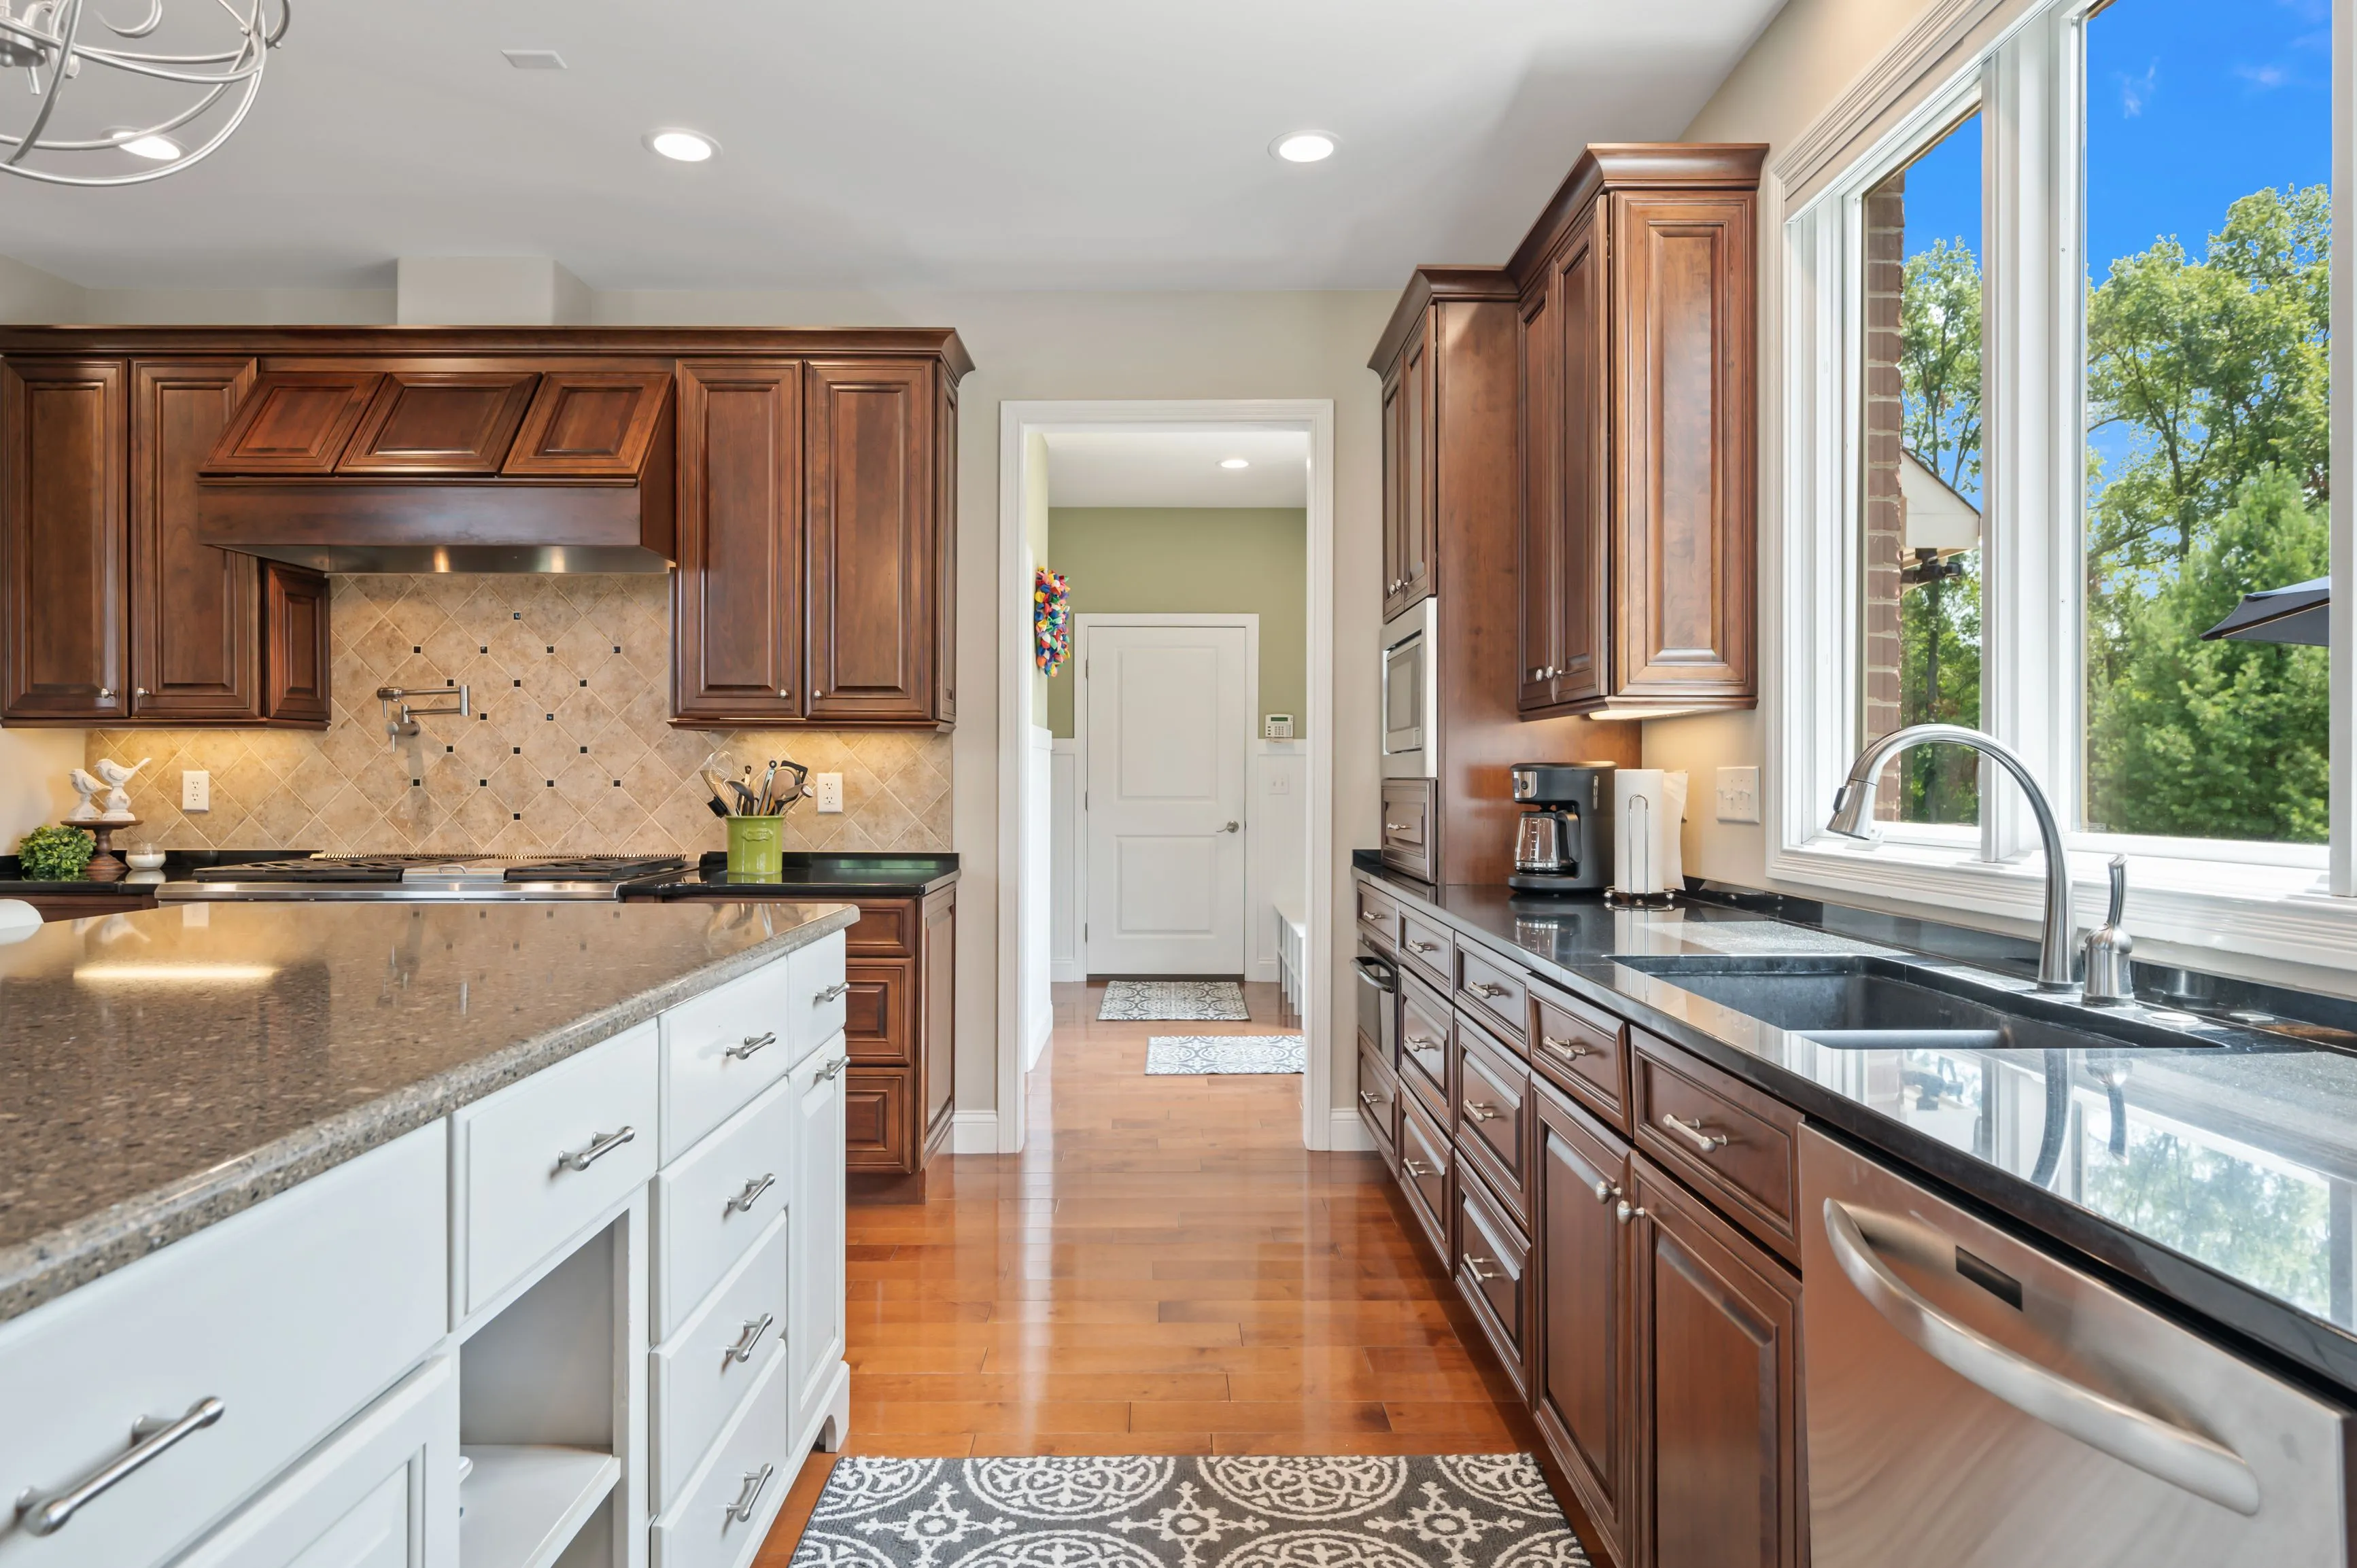 Modern kitchen interior with white and brown cabinets, granite countertops, and hardwood floors.